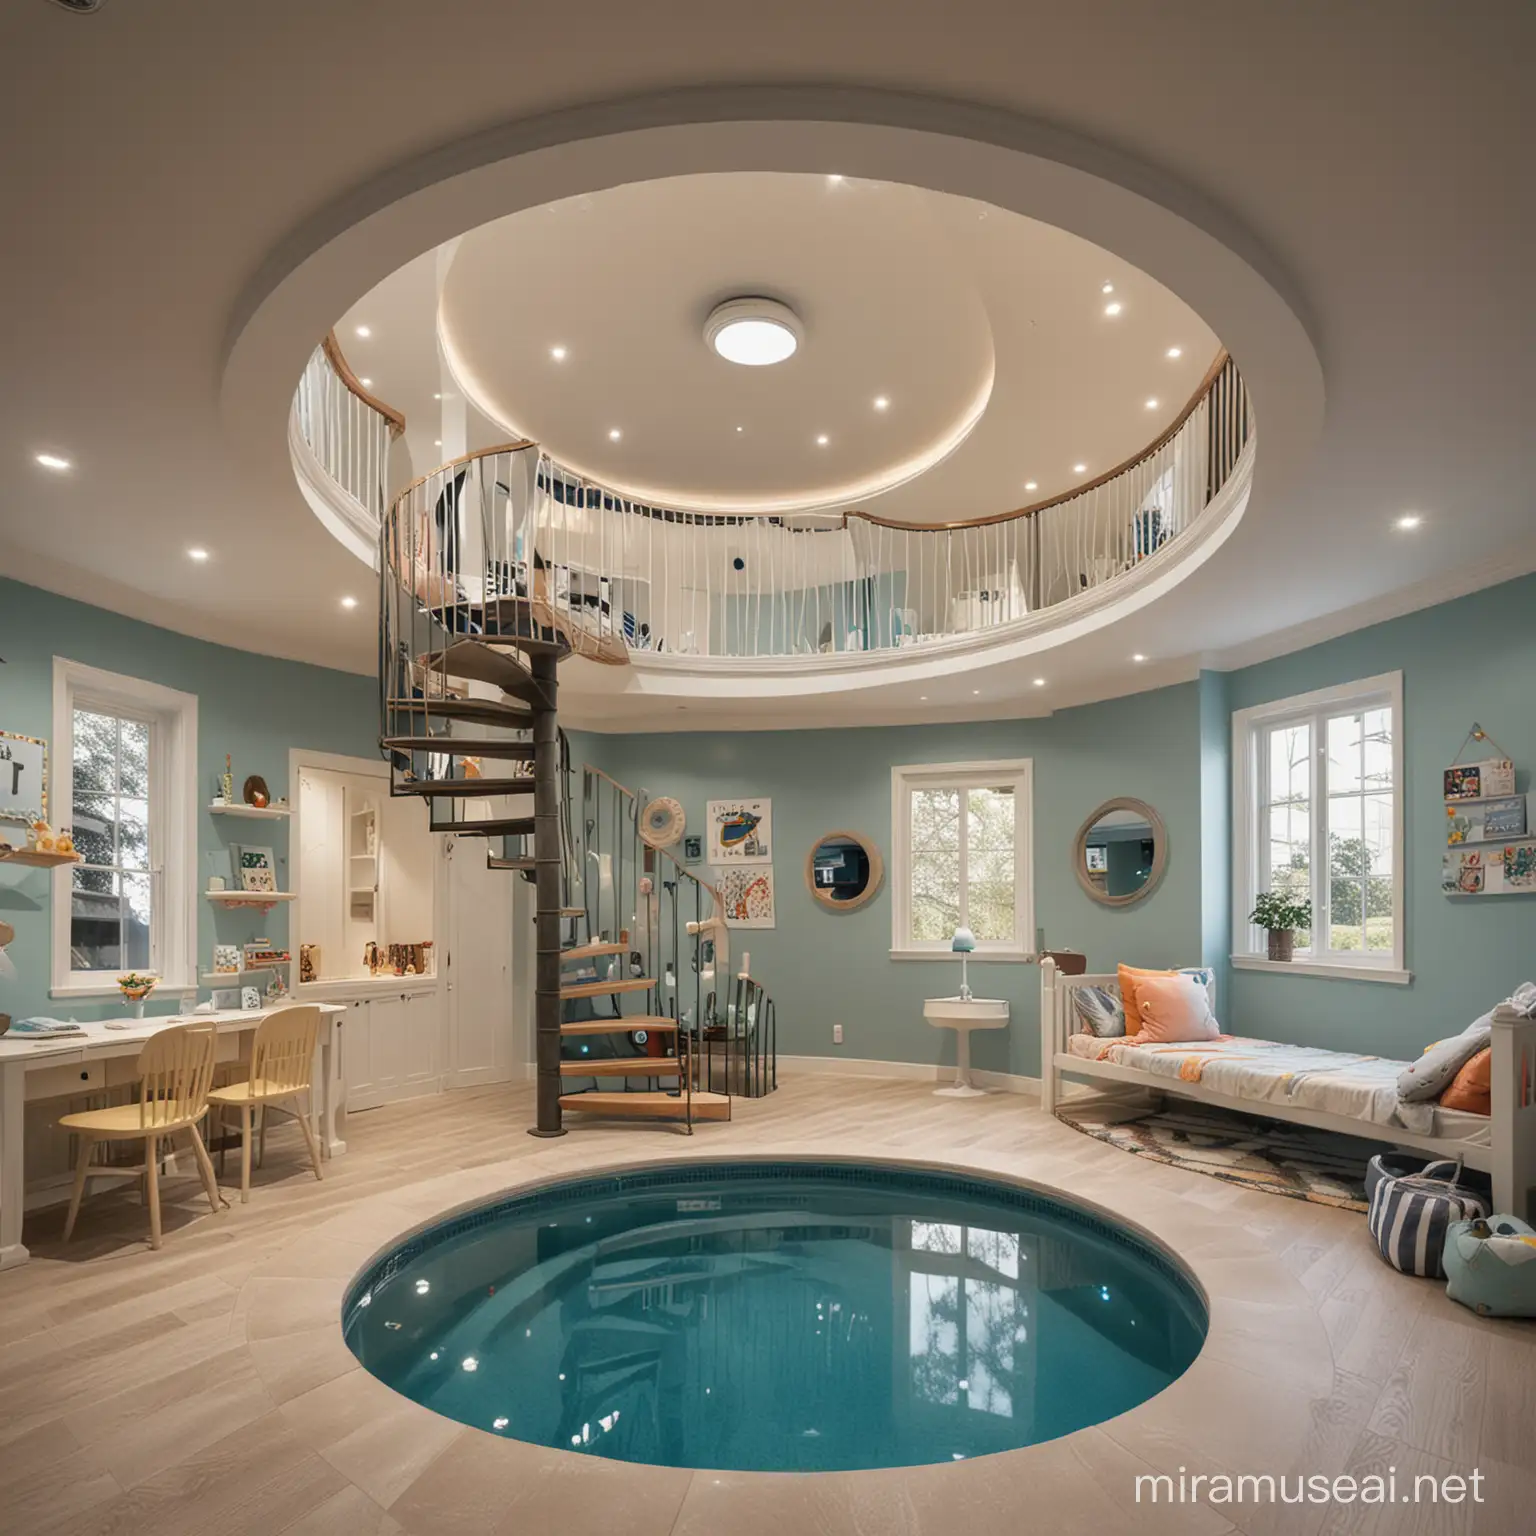 kids room with a spiral staircase in a middle of room and round window of a size of wall and a swimming pool night vision

